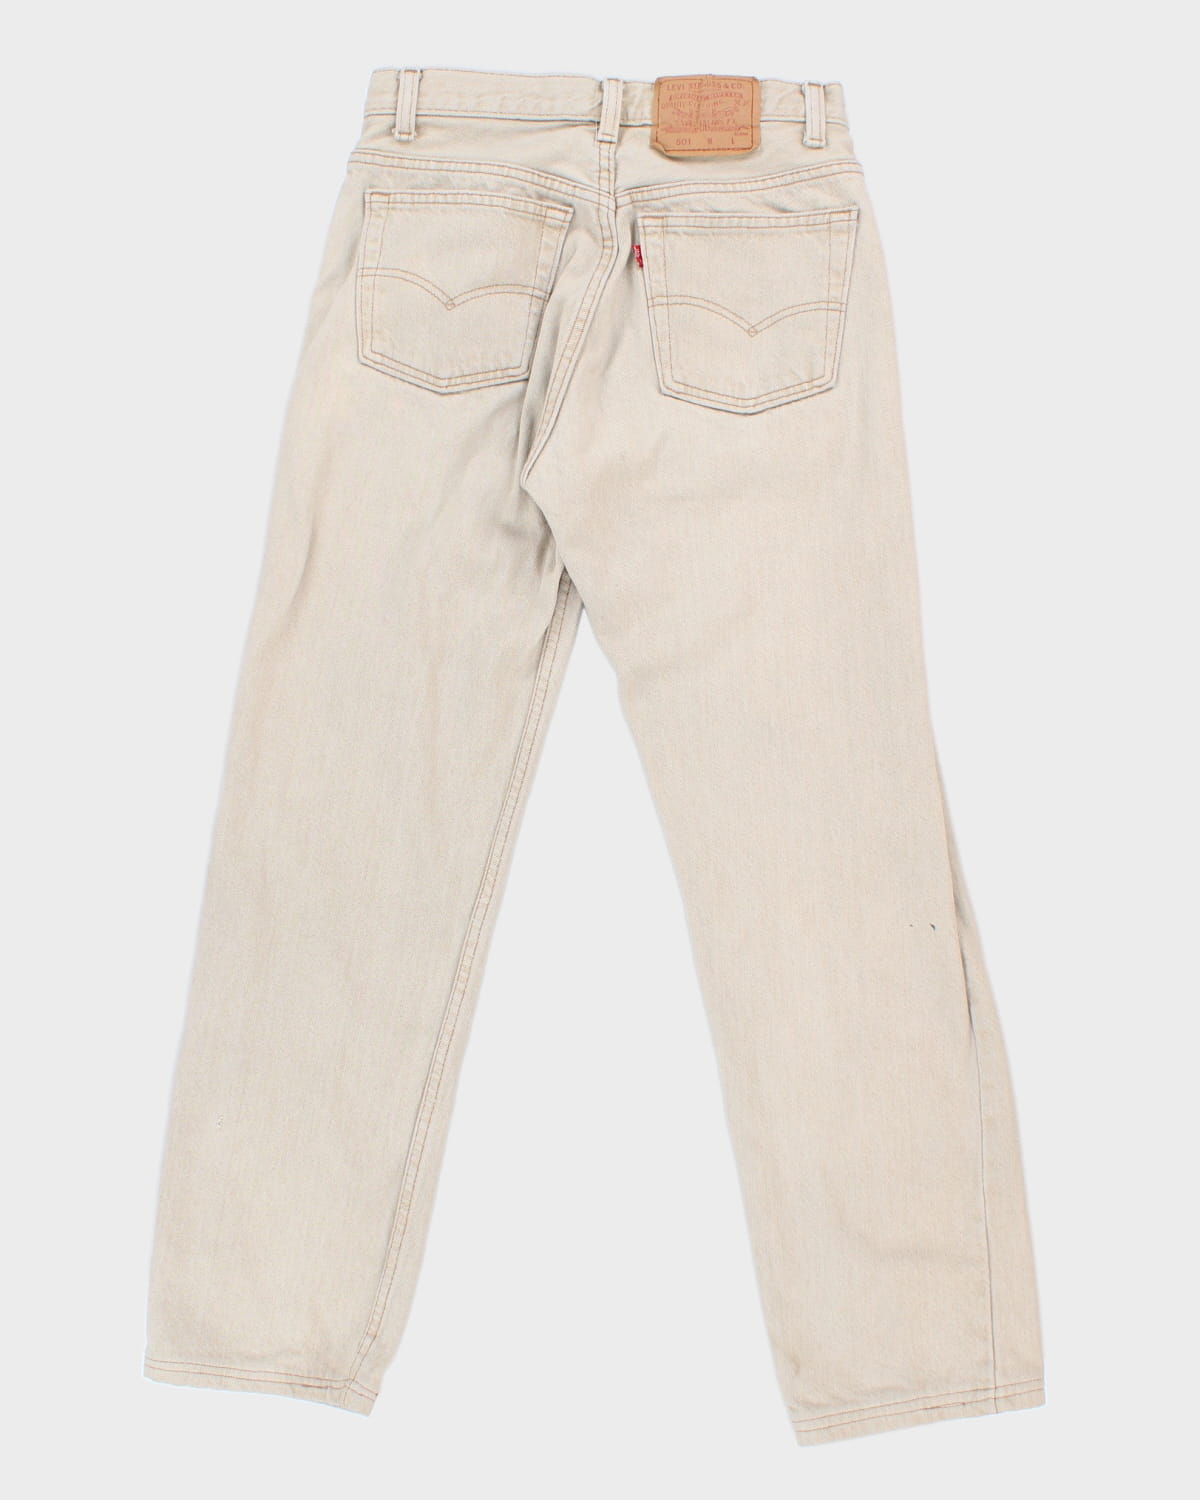 Stained Beige 501s Levi's Jeans - 29